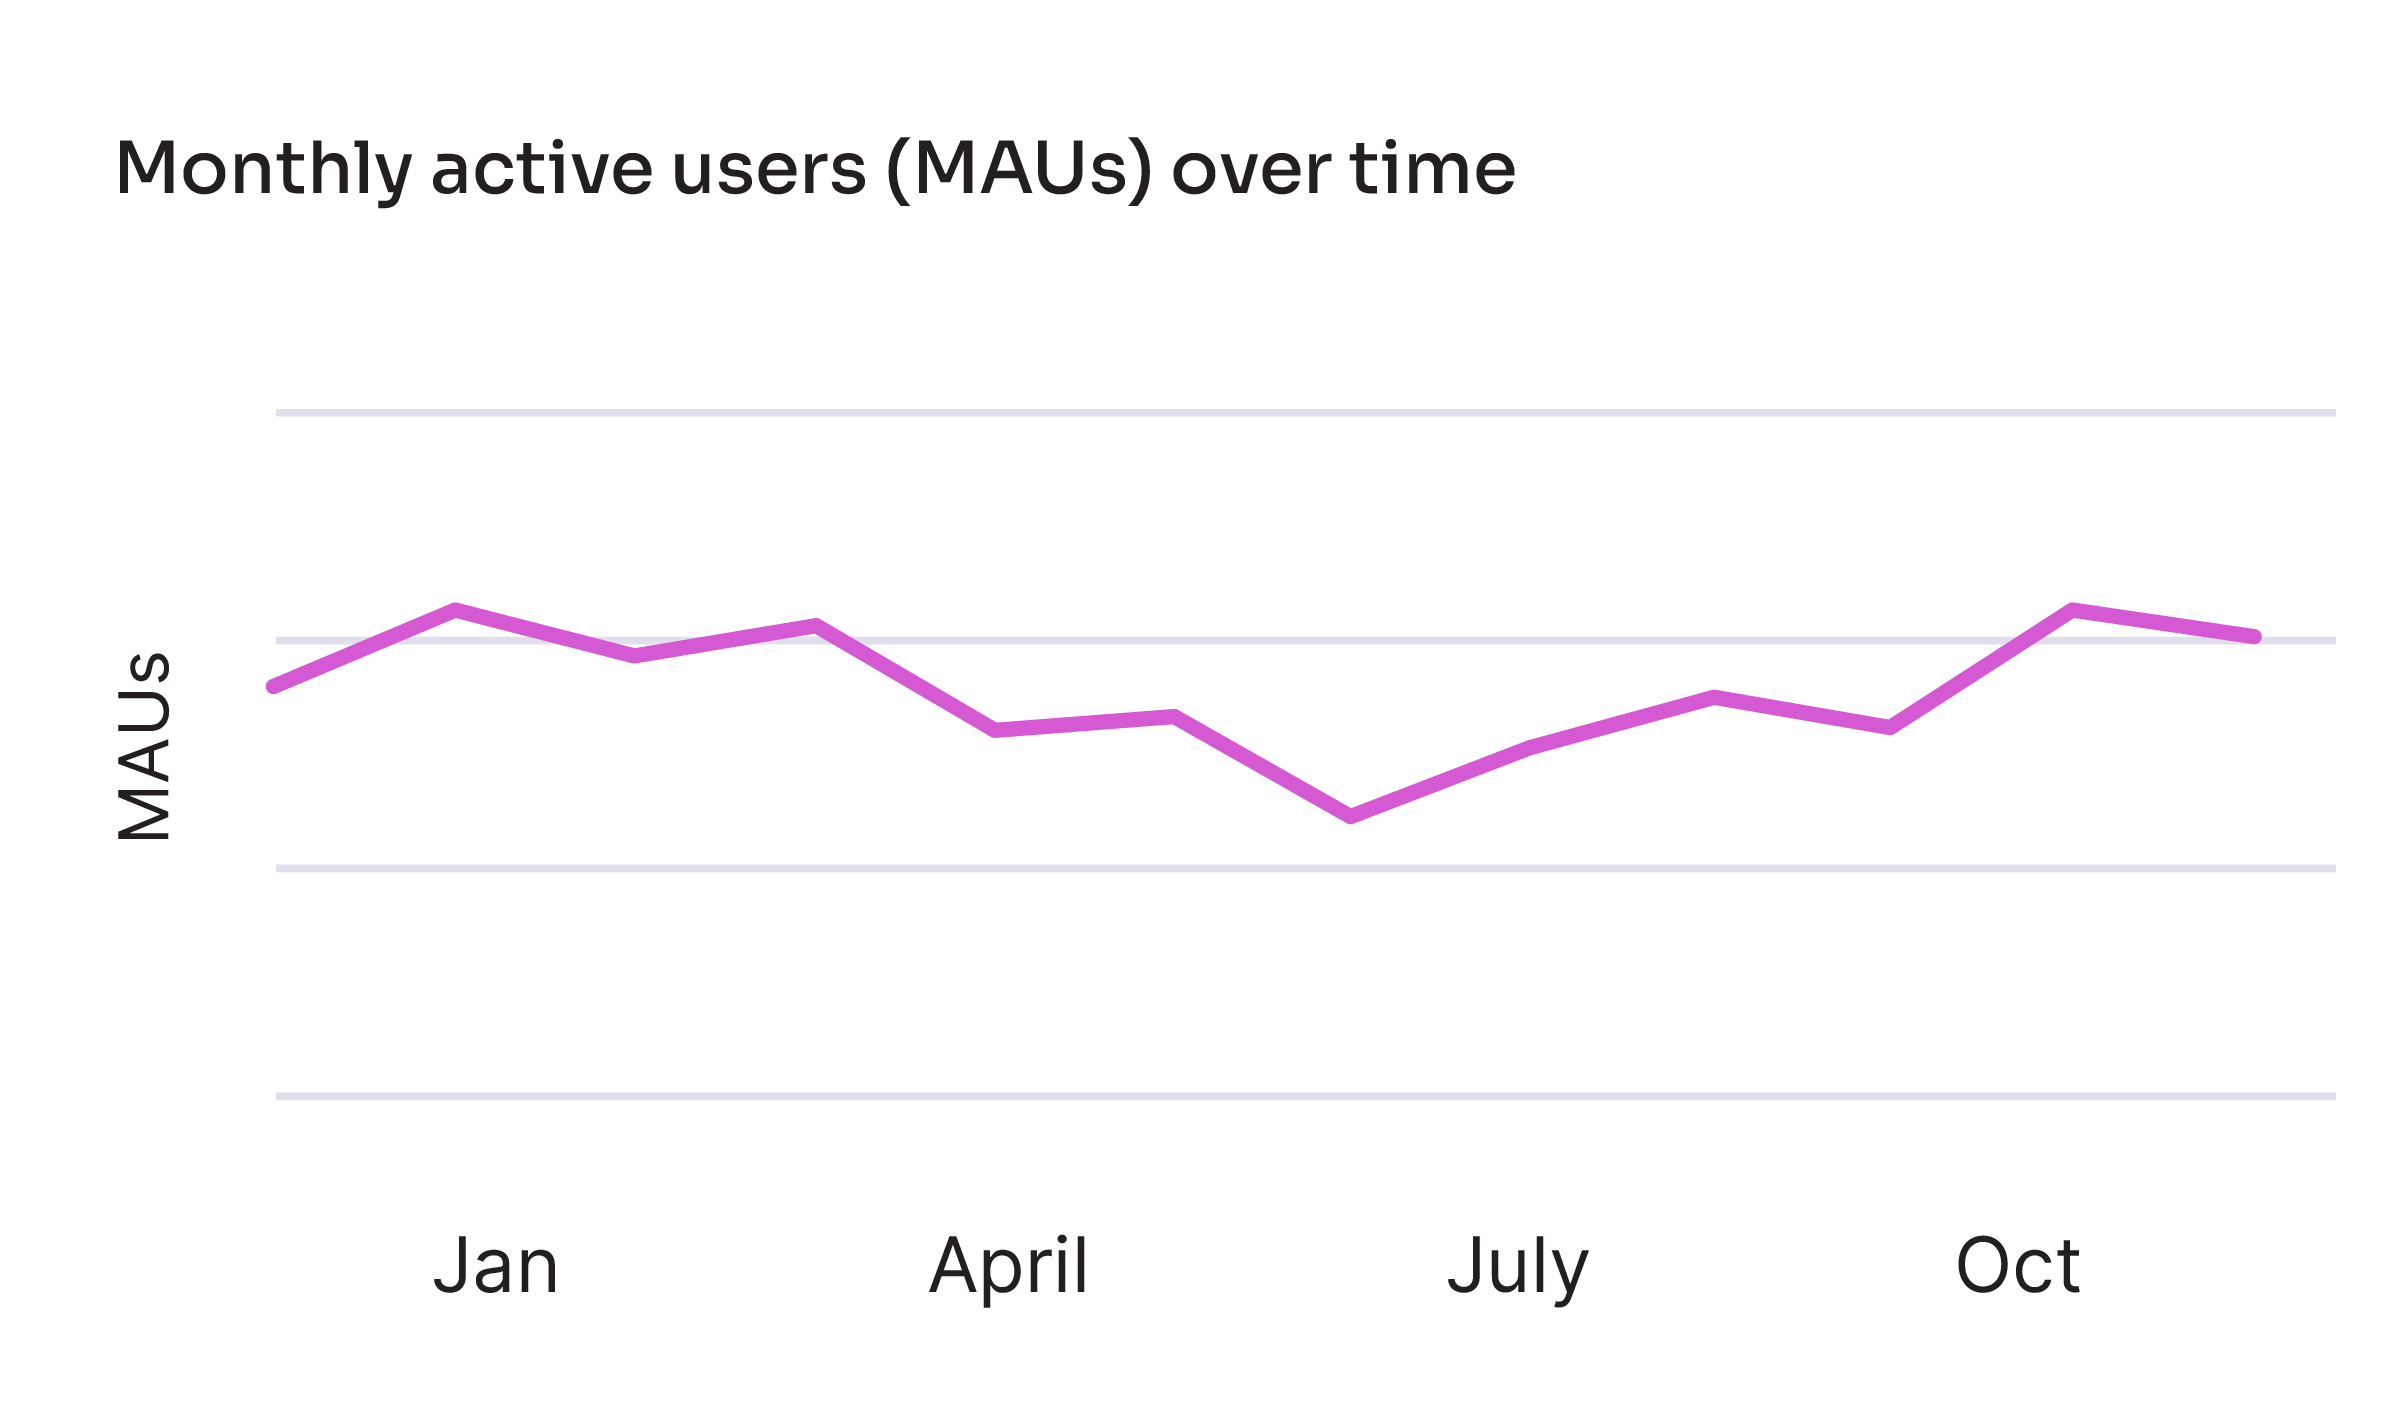 MAUs over time